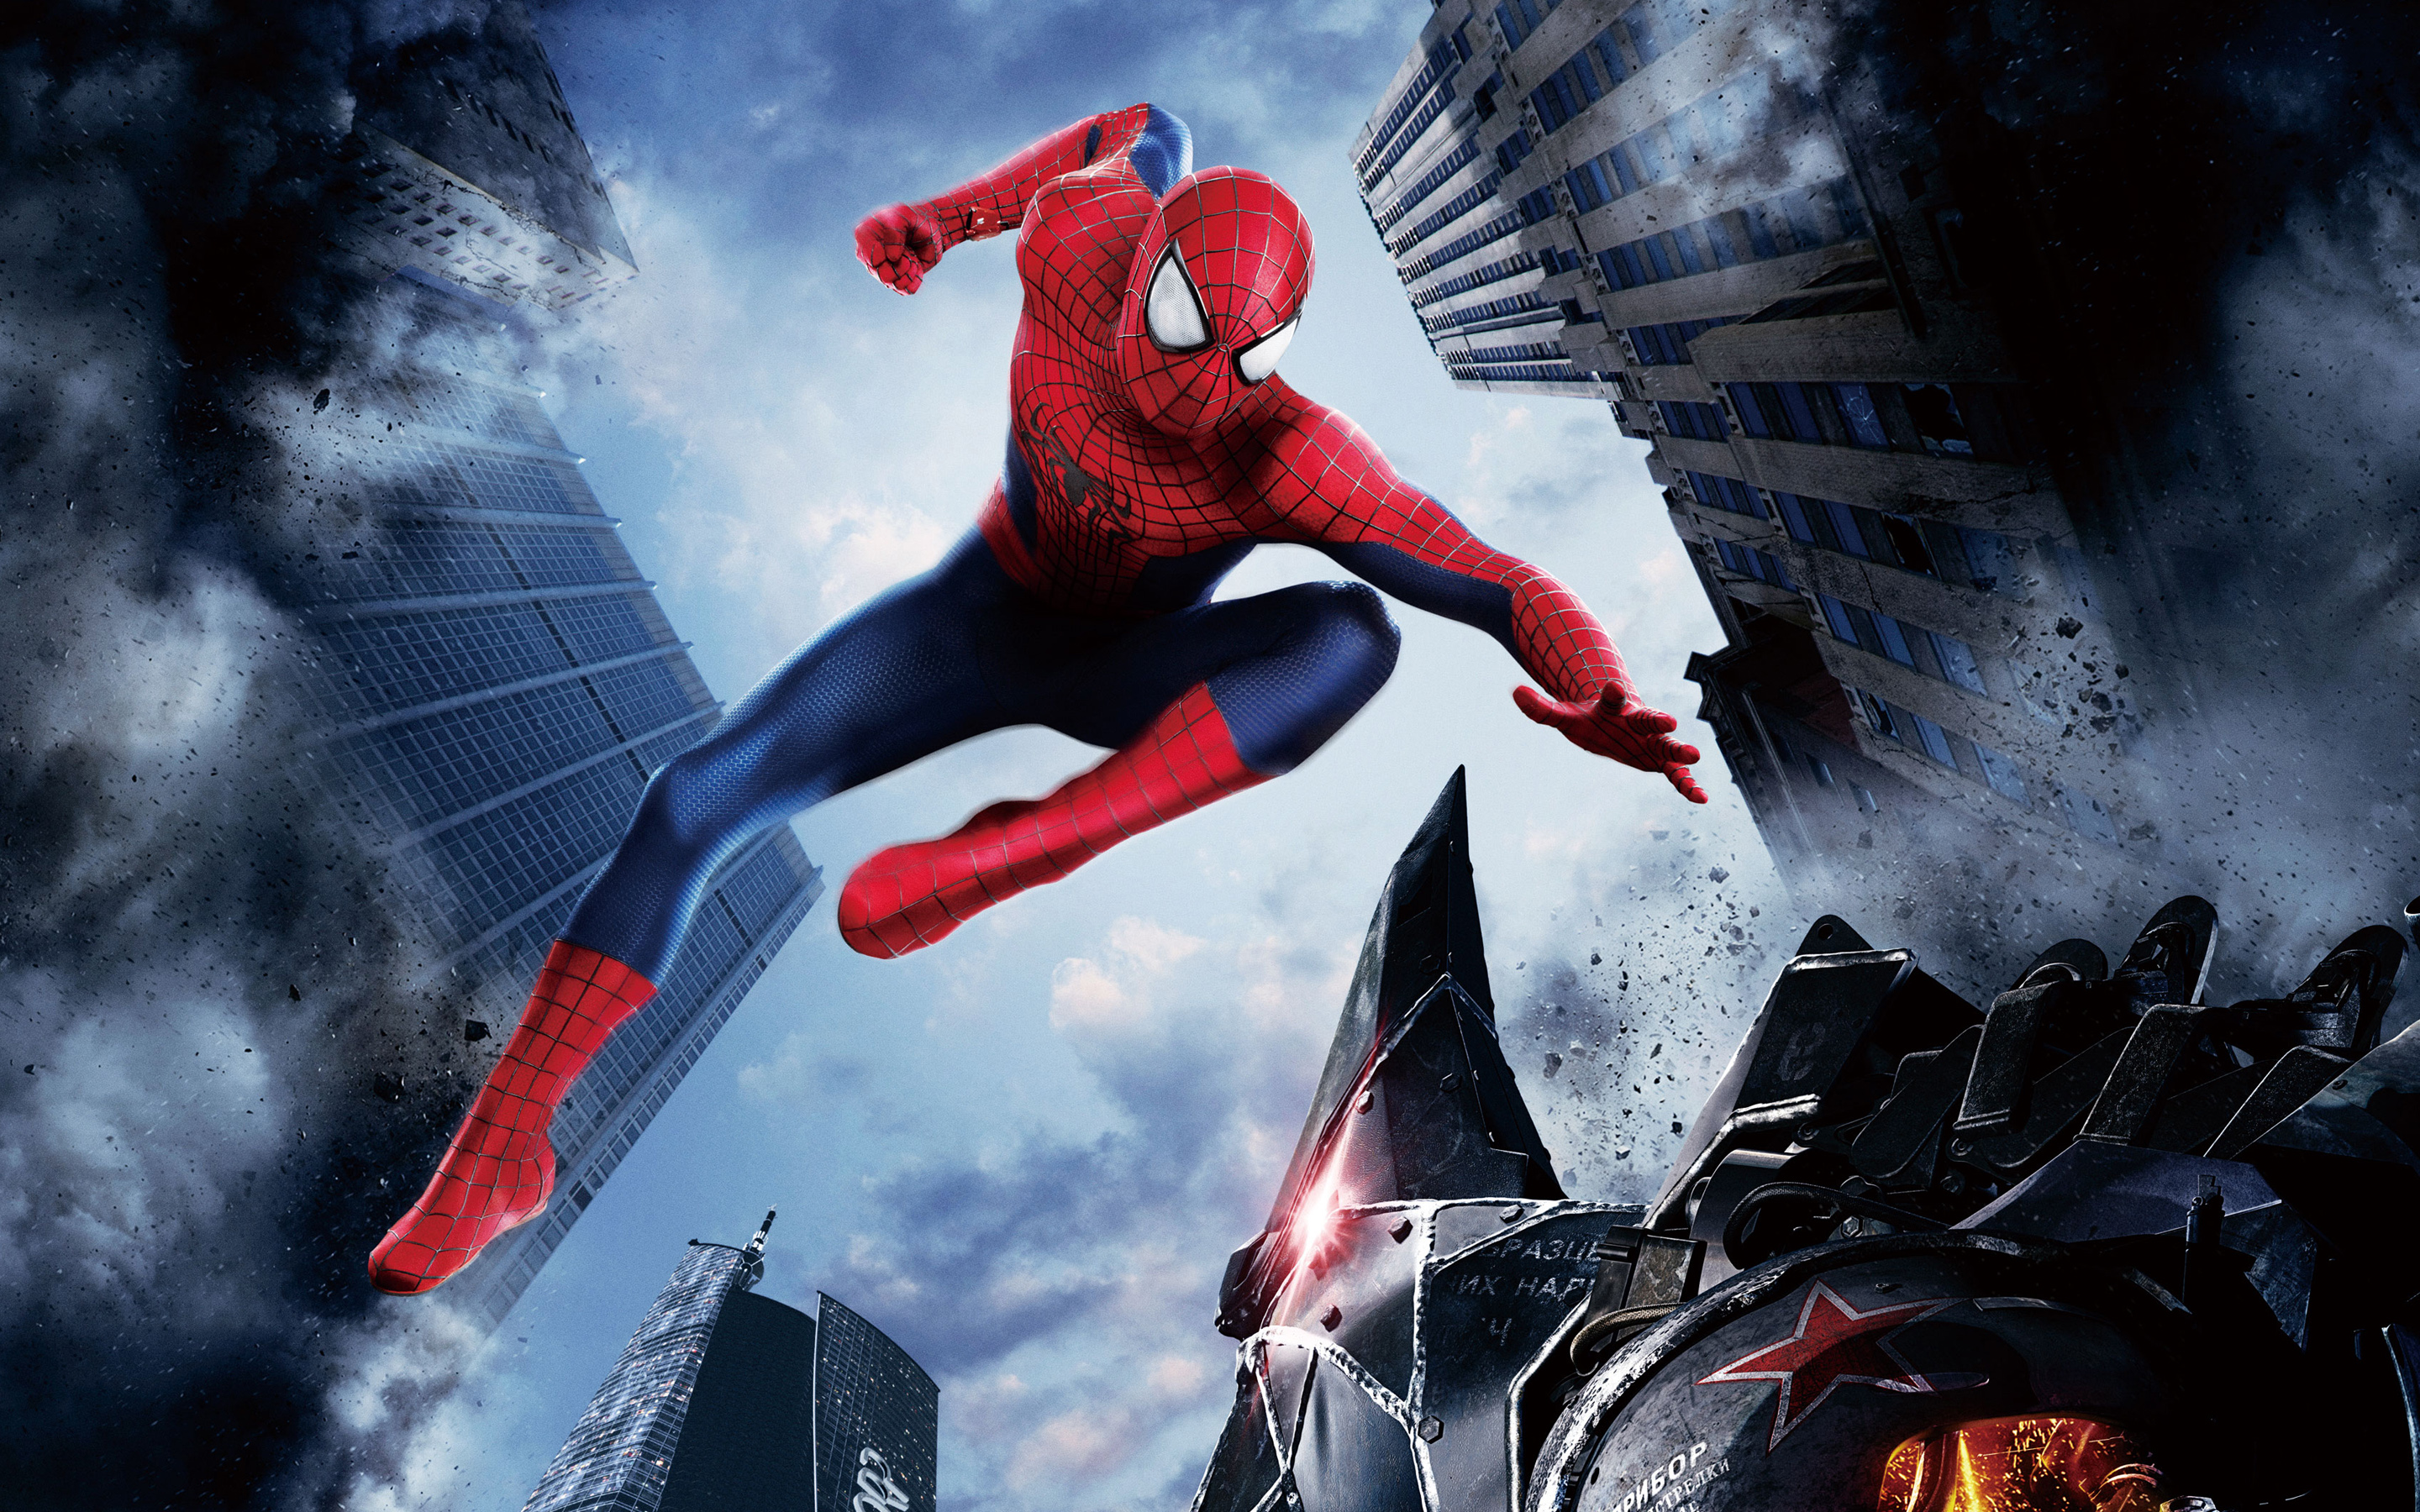 Free download The Amazing Spider Man 2 2014 Movie Wallpaper HD Wallpaper [2880x1800] for your Desktop, Mobile & Tablet. Explore Awesome Spider Man Wallpaper. Spider Wallpaper, The Amazing Spider